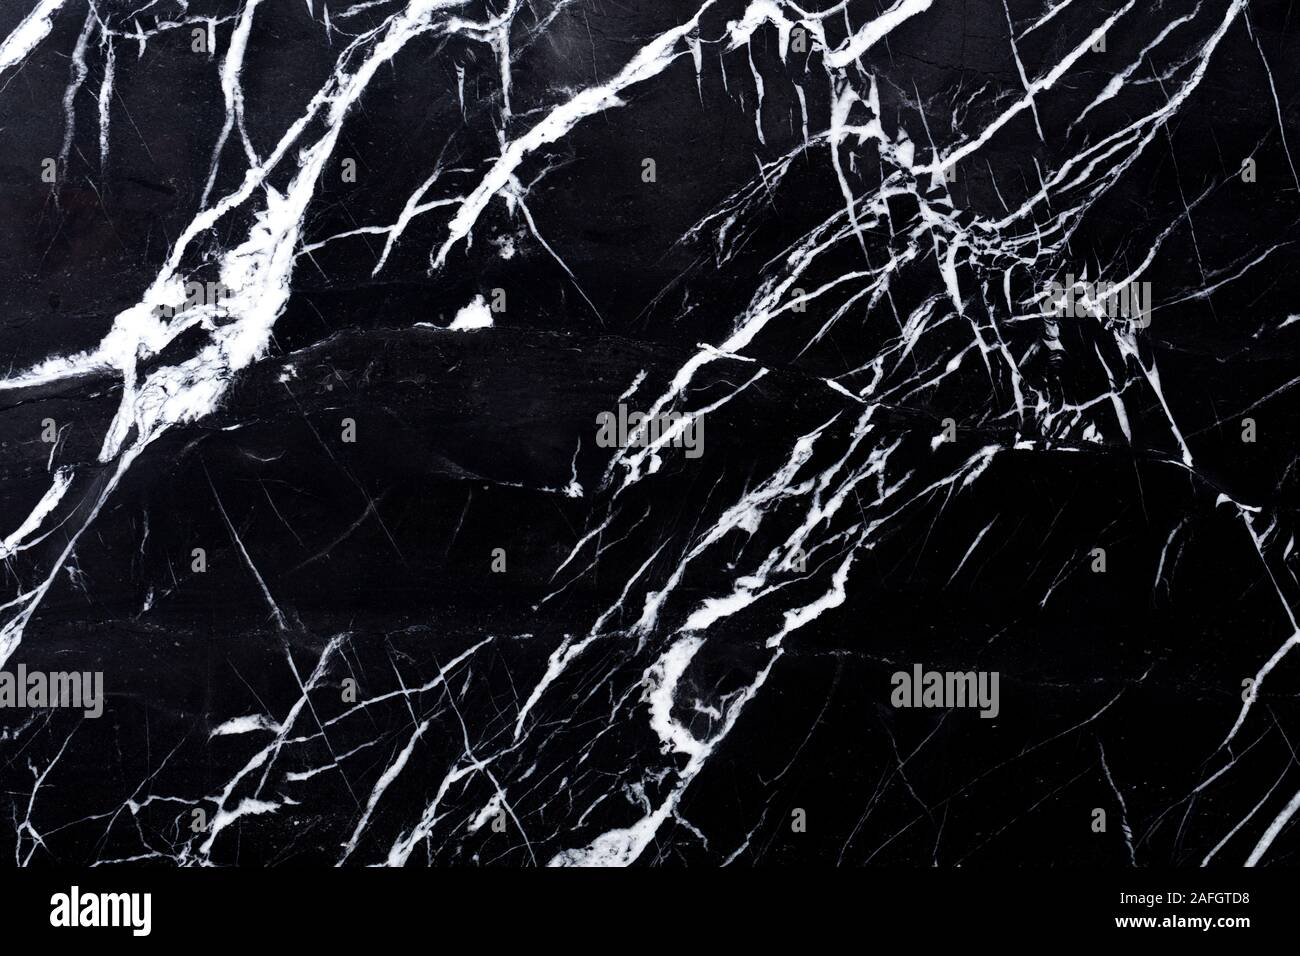 Marble background in contrast black and white colors for new design work. High quality texture. Stock Photo